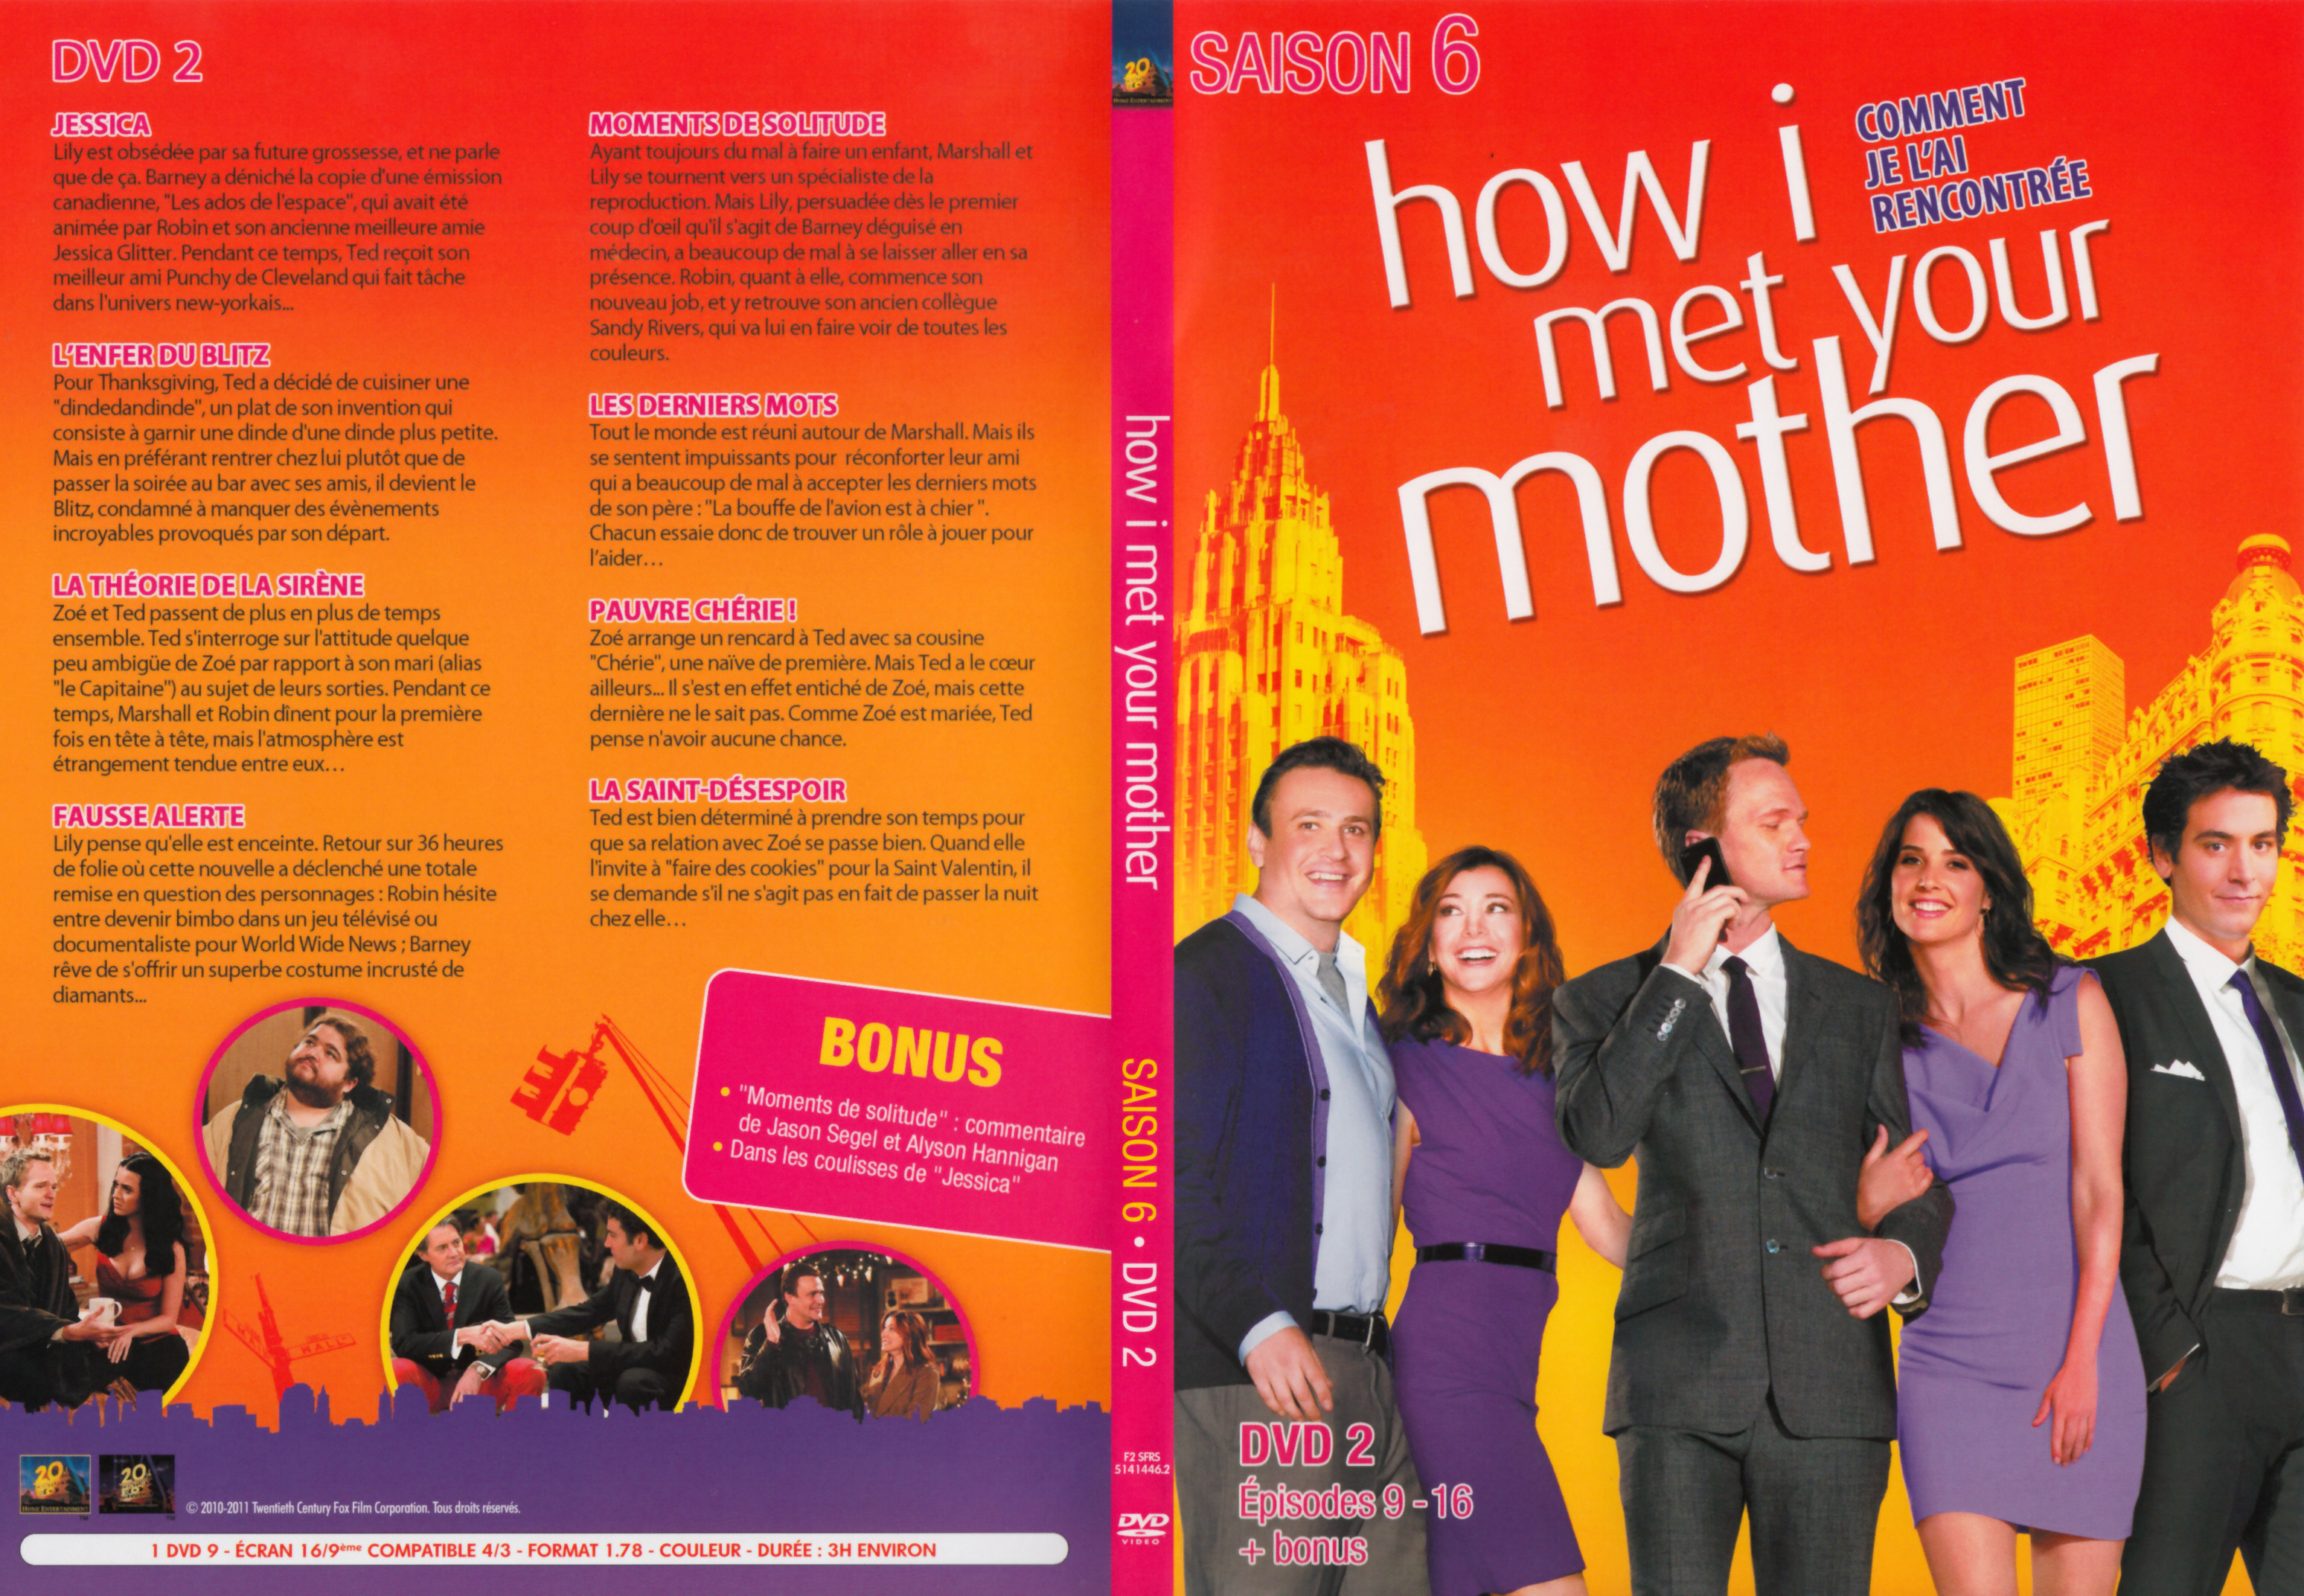 Jaquette DVD How i met your mother Saison 6 DVD 2